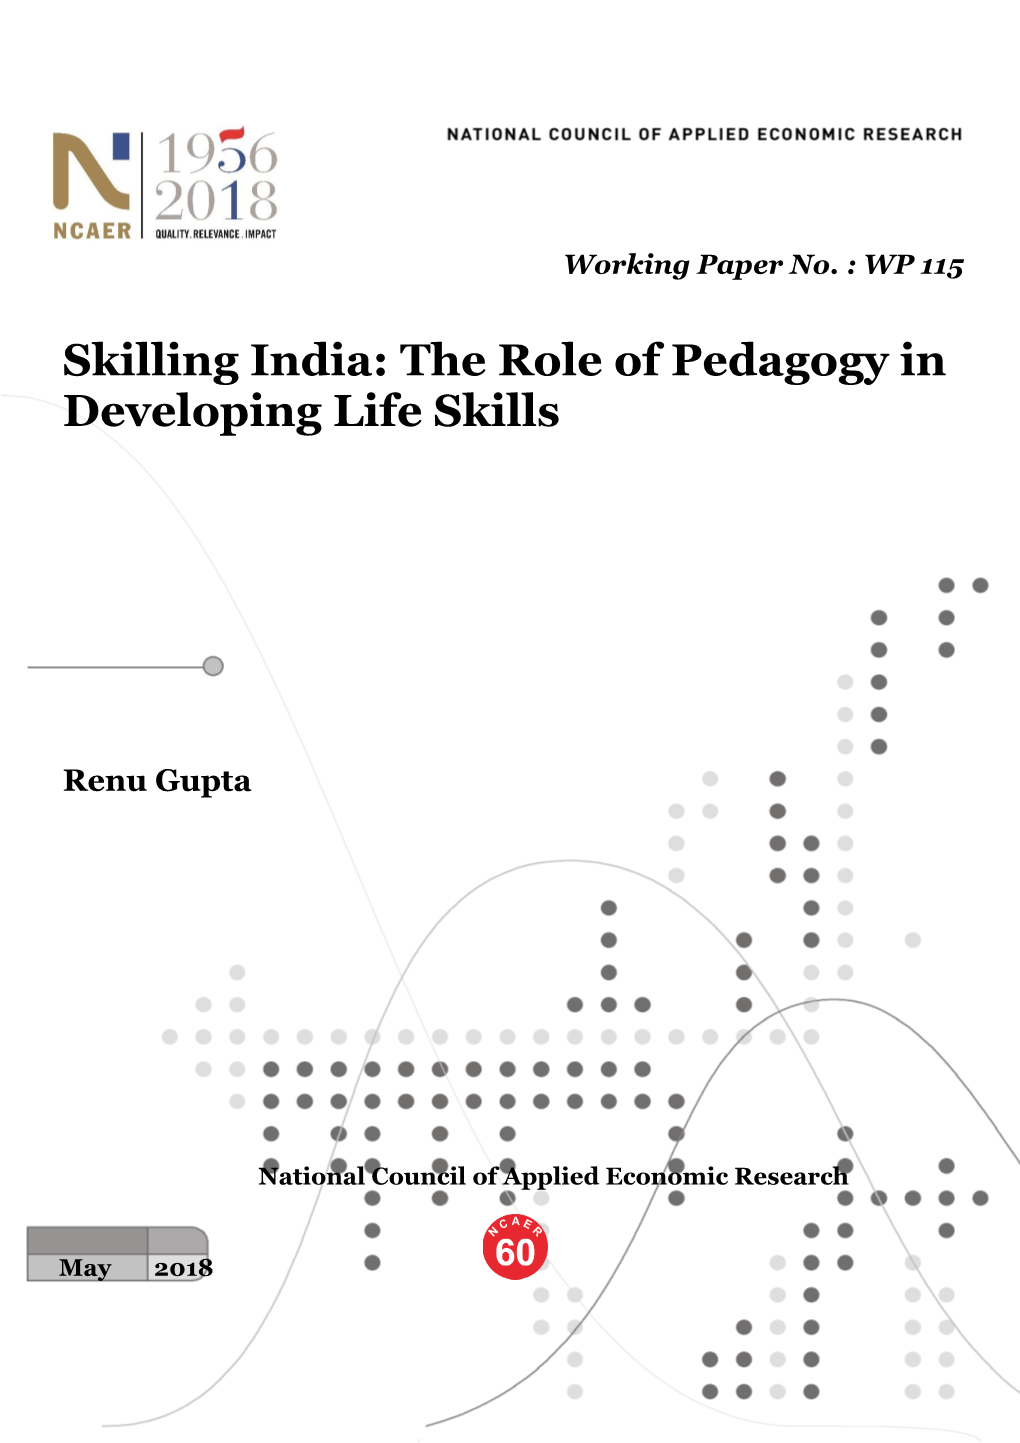 The Role of Pedagogy in Developing Life Skills